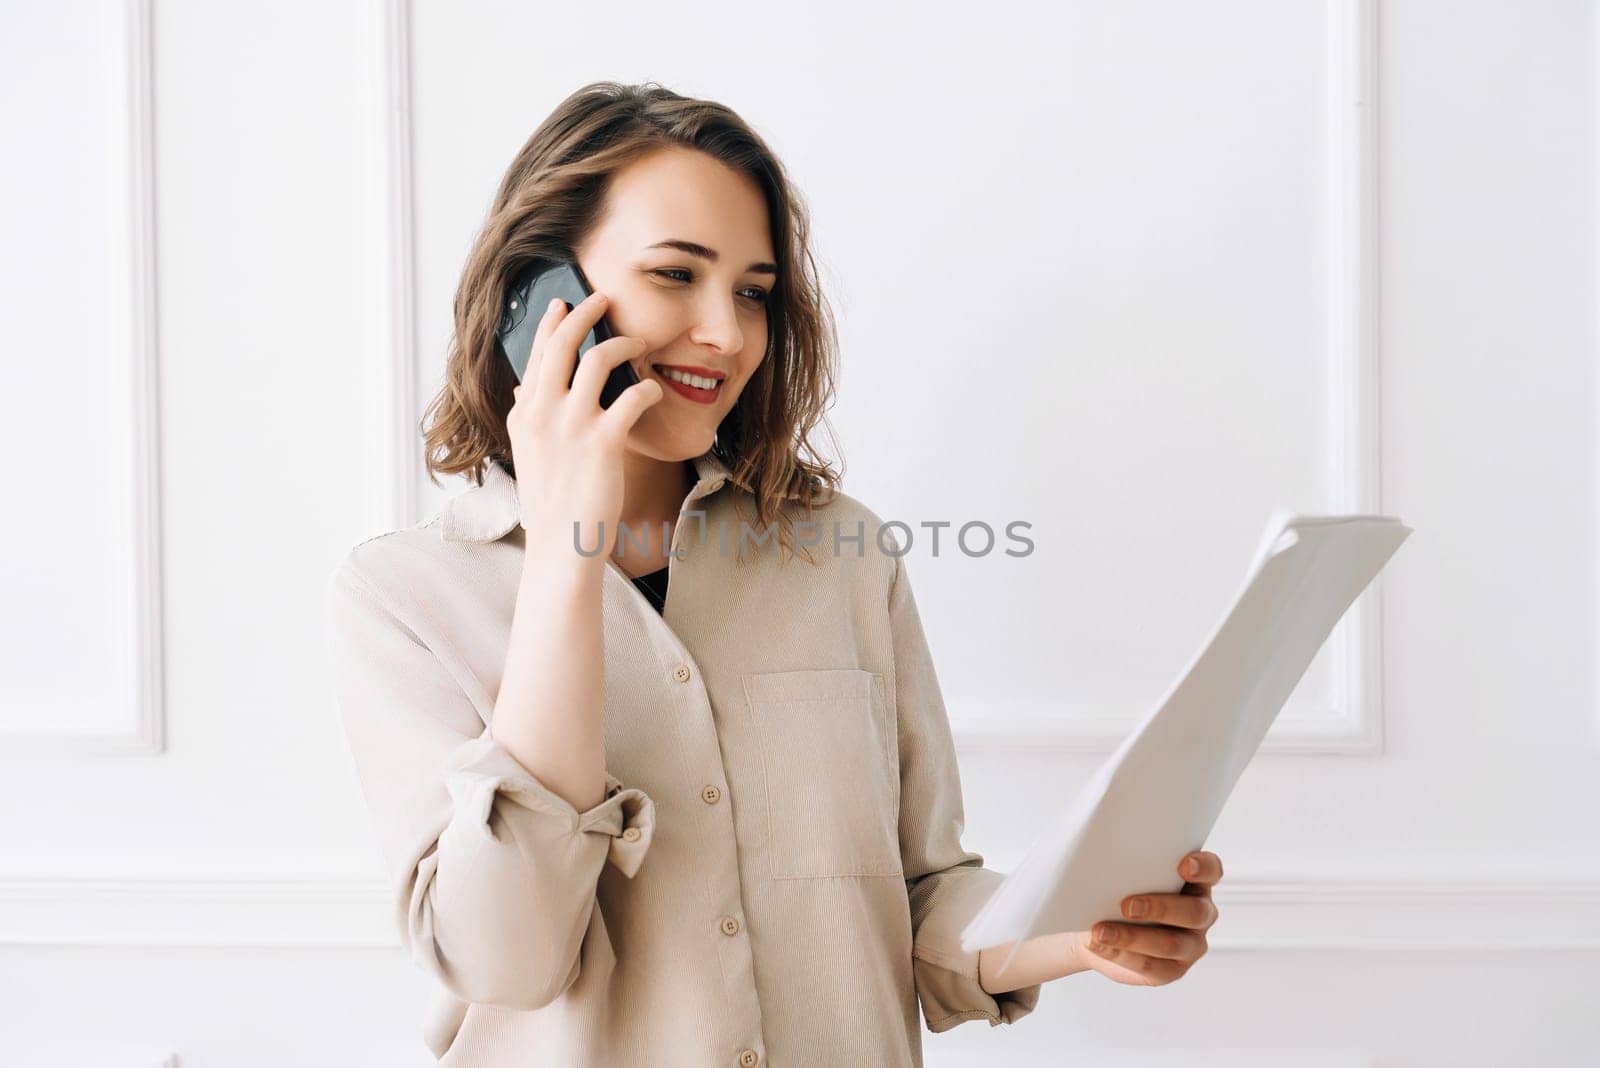 Smiling Millennial Woman Engaged in Phone Call, Discussing Documents with Client. Smiling millennial woman calling by smartphone, talking with client, looking at documents.